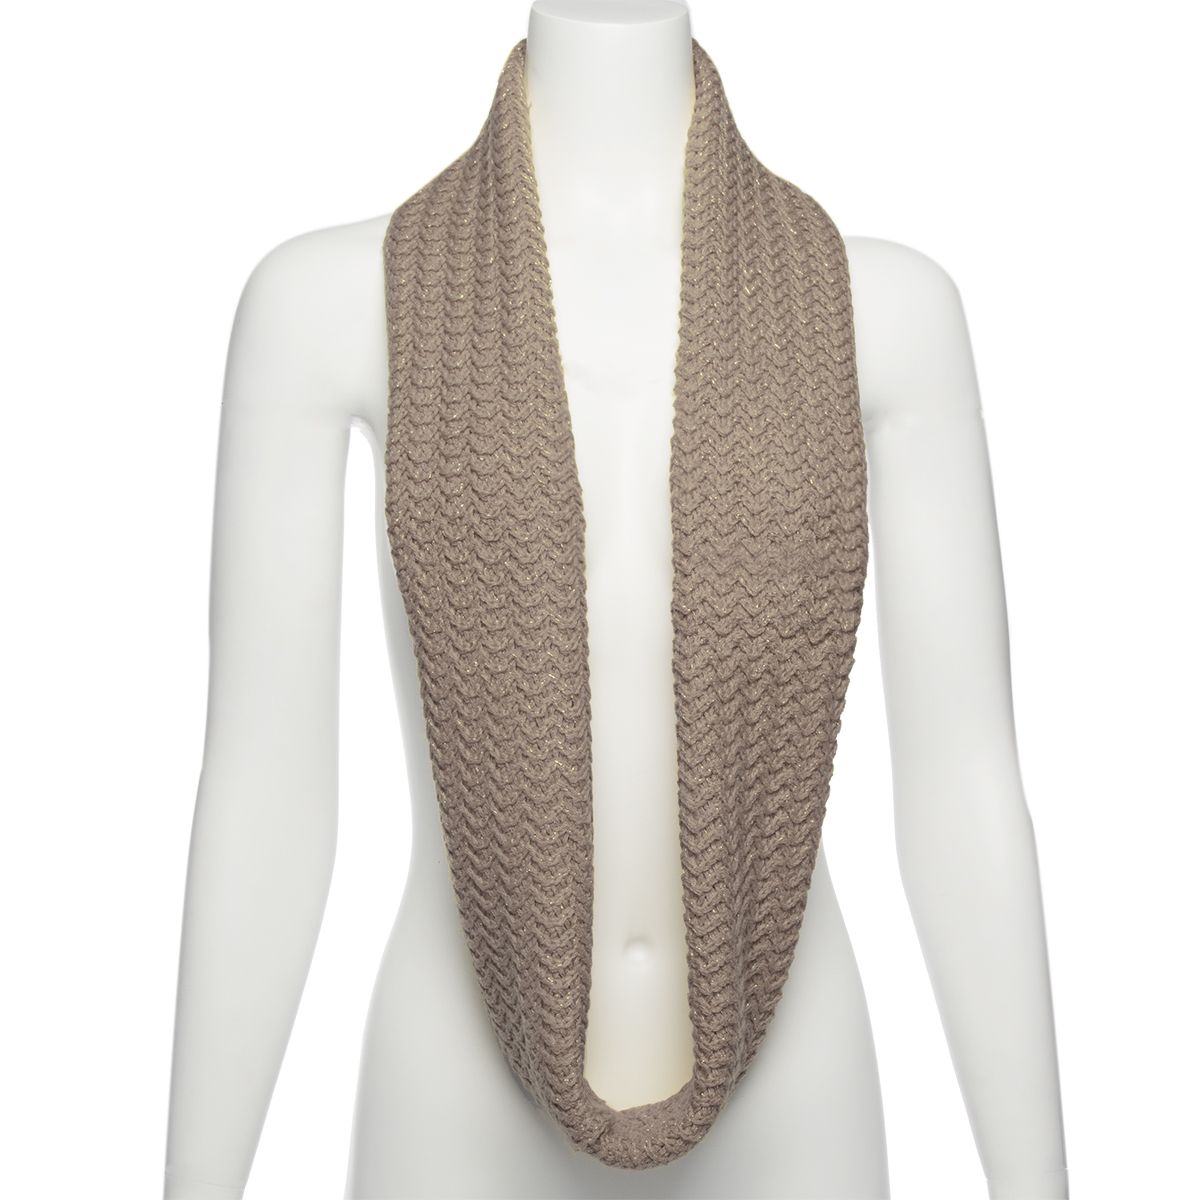 Loop Infinity Scarf With Metallic Knit by The Royal Standard - Scarvesnthangs